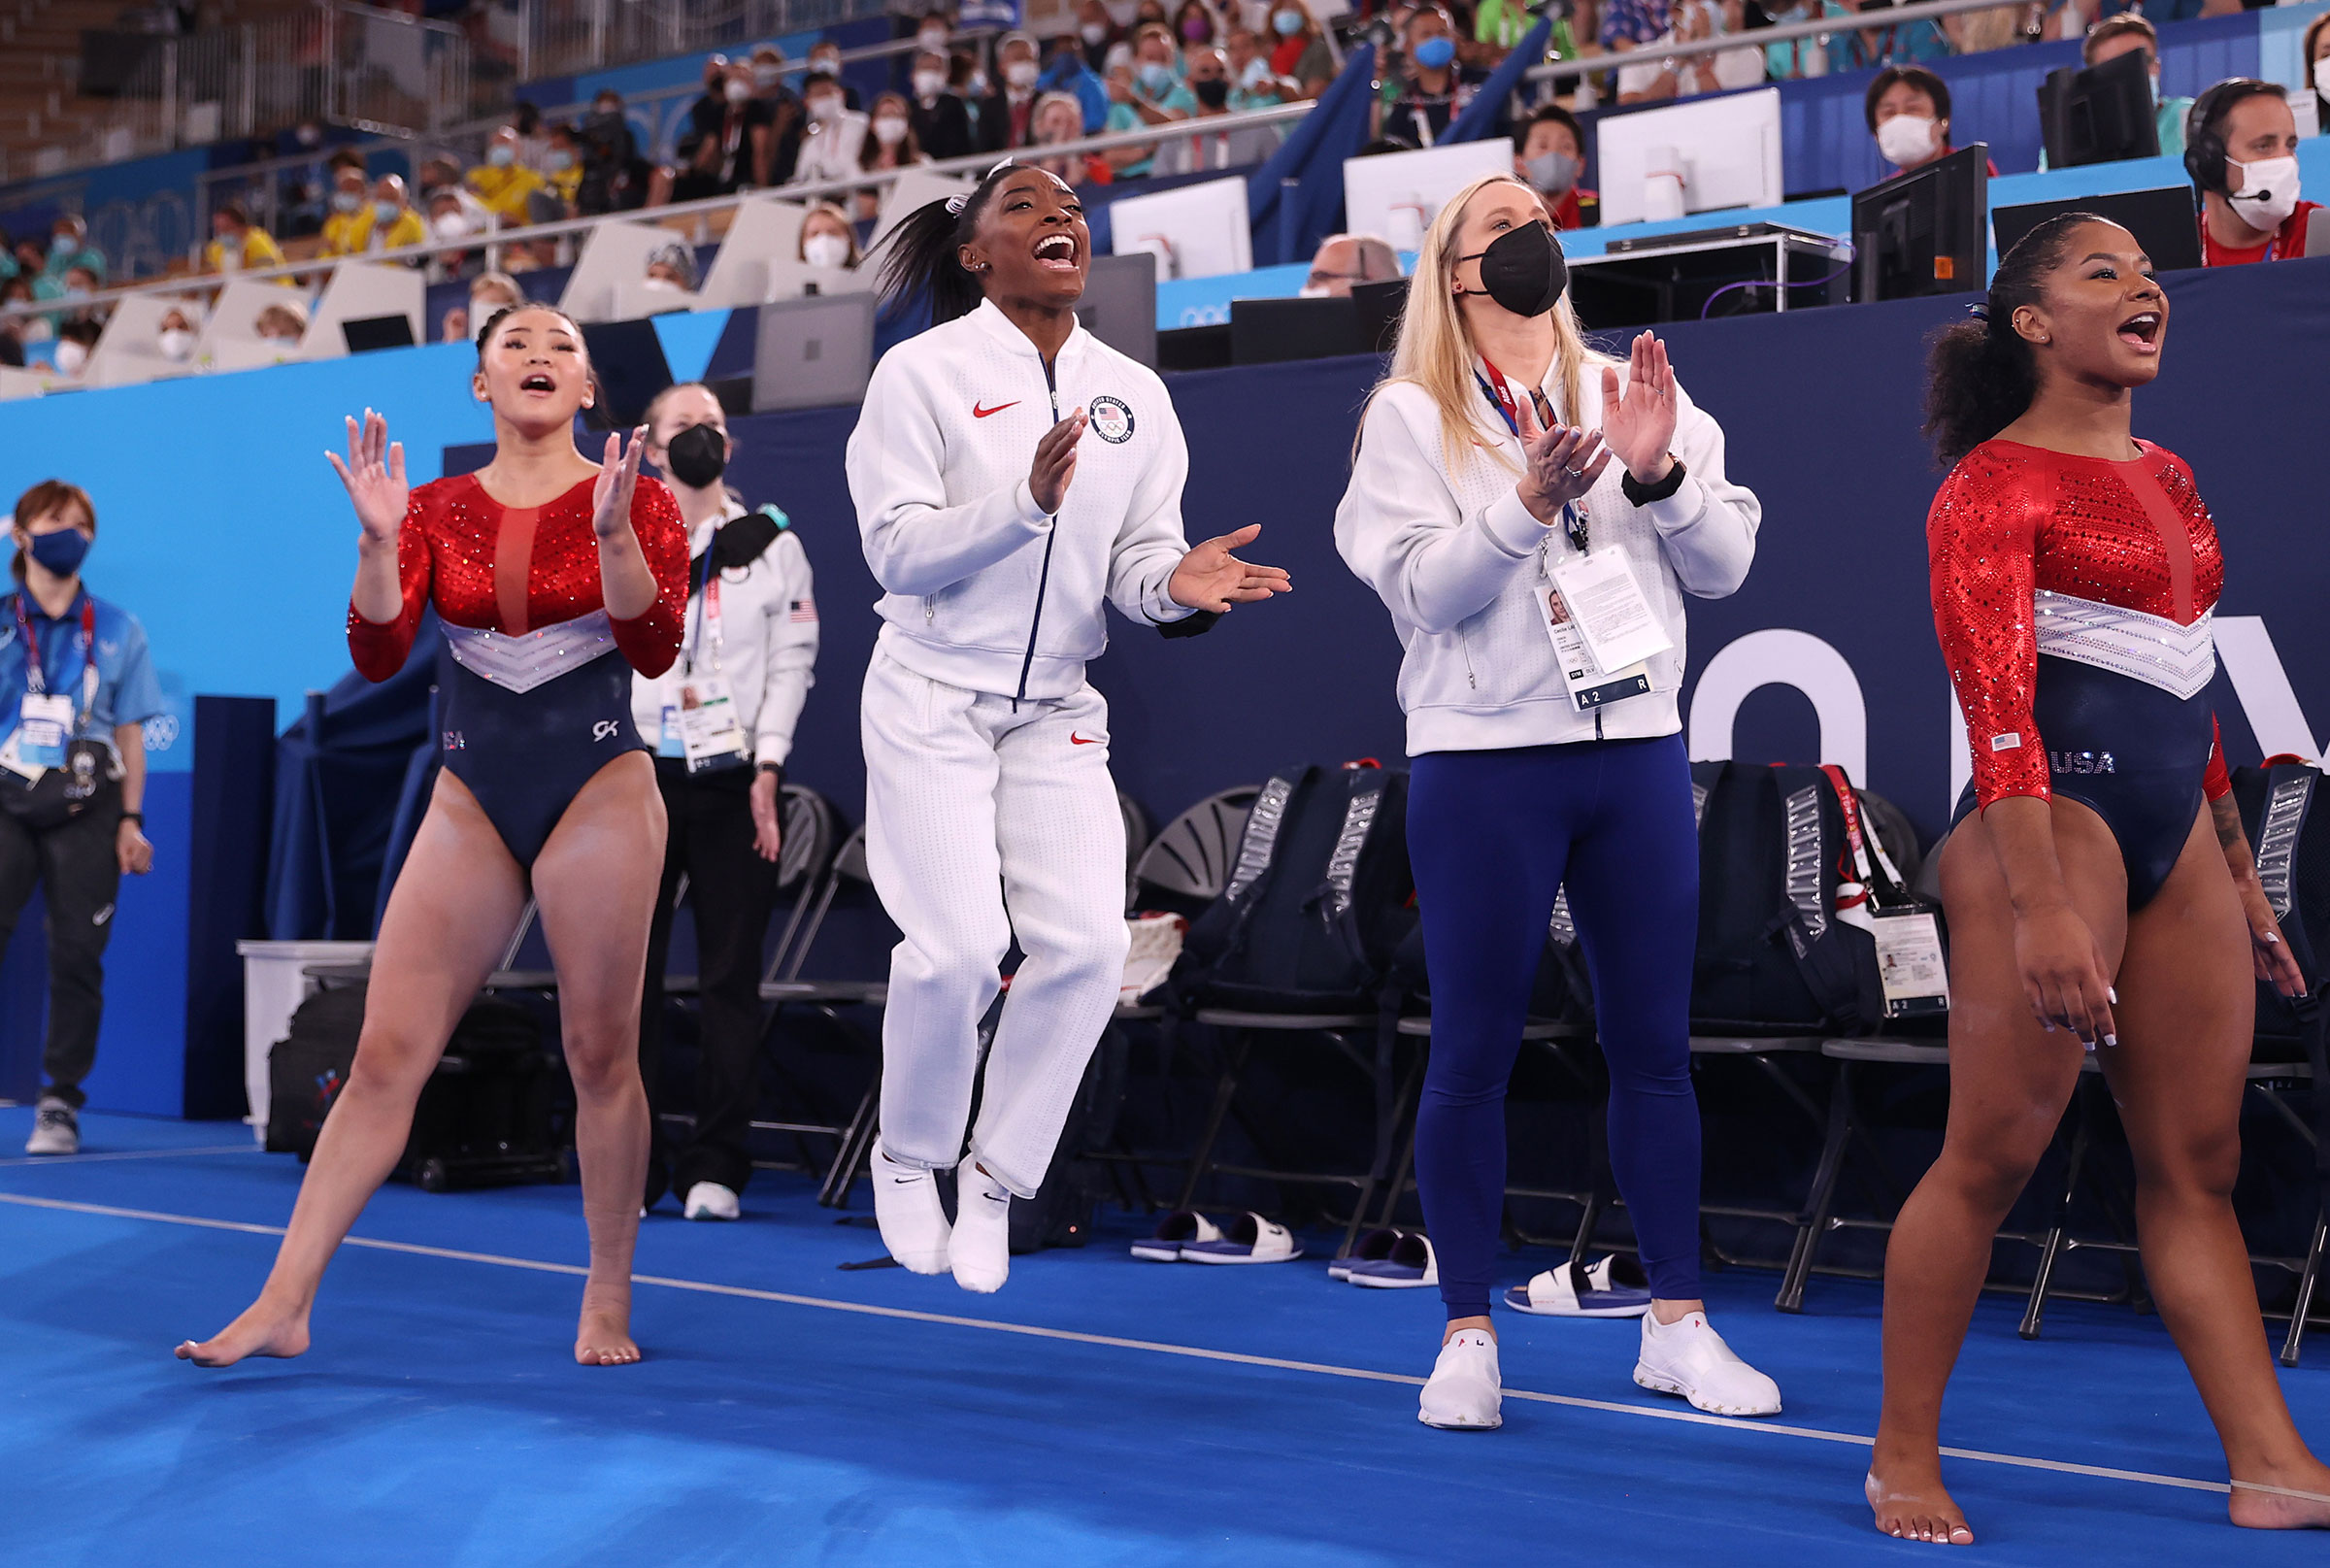 Sunisa Lee, Simone Biles, coach Cecile Landi and Jordan Chiles of Team United States cheer as Grace McCallum competes in floor routine during the Women's Team Final on July 27. (Laurence Griffiths—Getty Images)